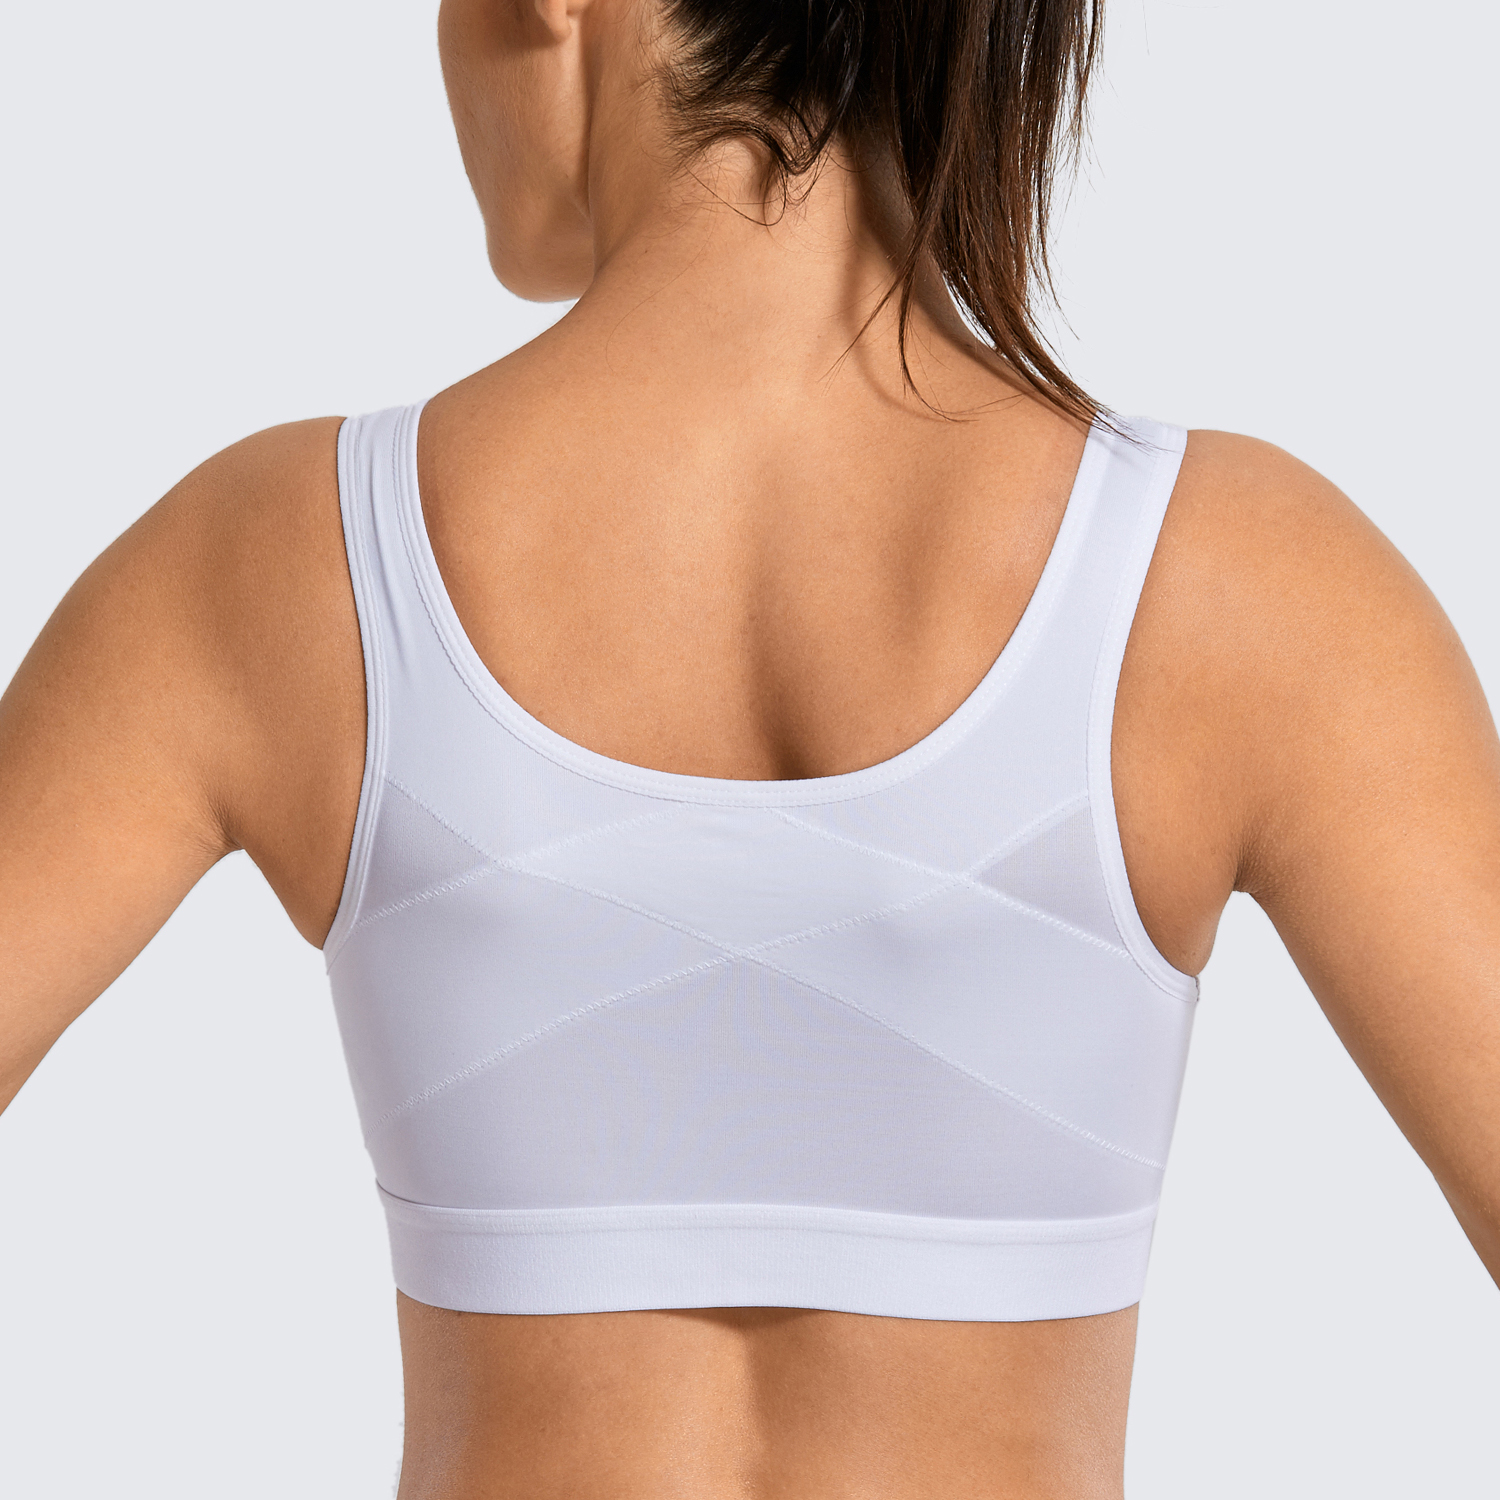 SYROKAN Women's High Impact Seamless Racerback Wirefree Sports Running Bra  with Built-in Cups